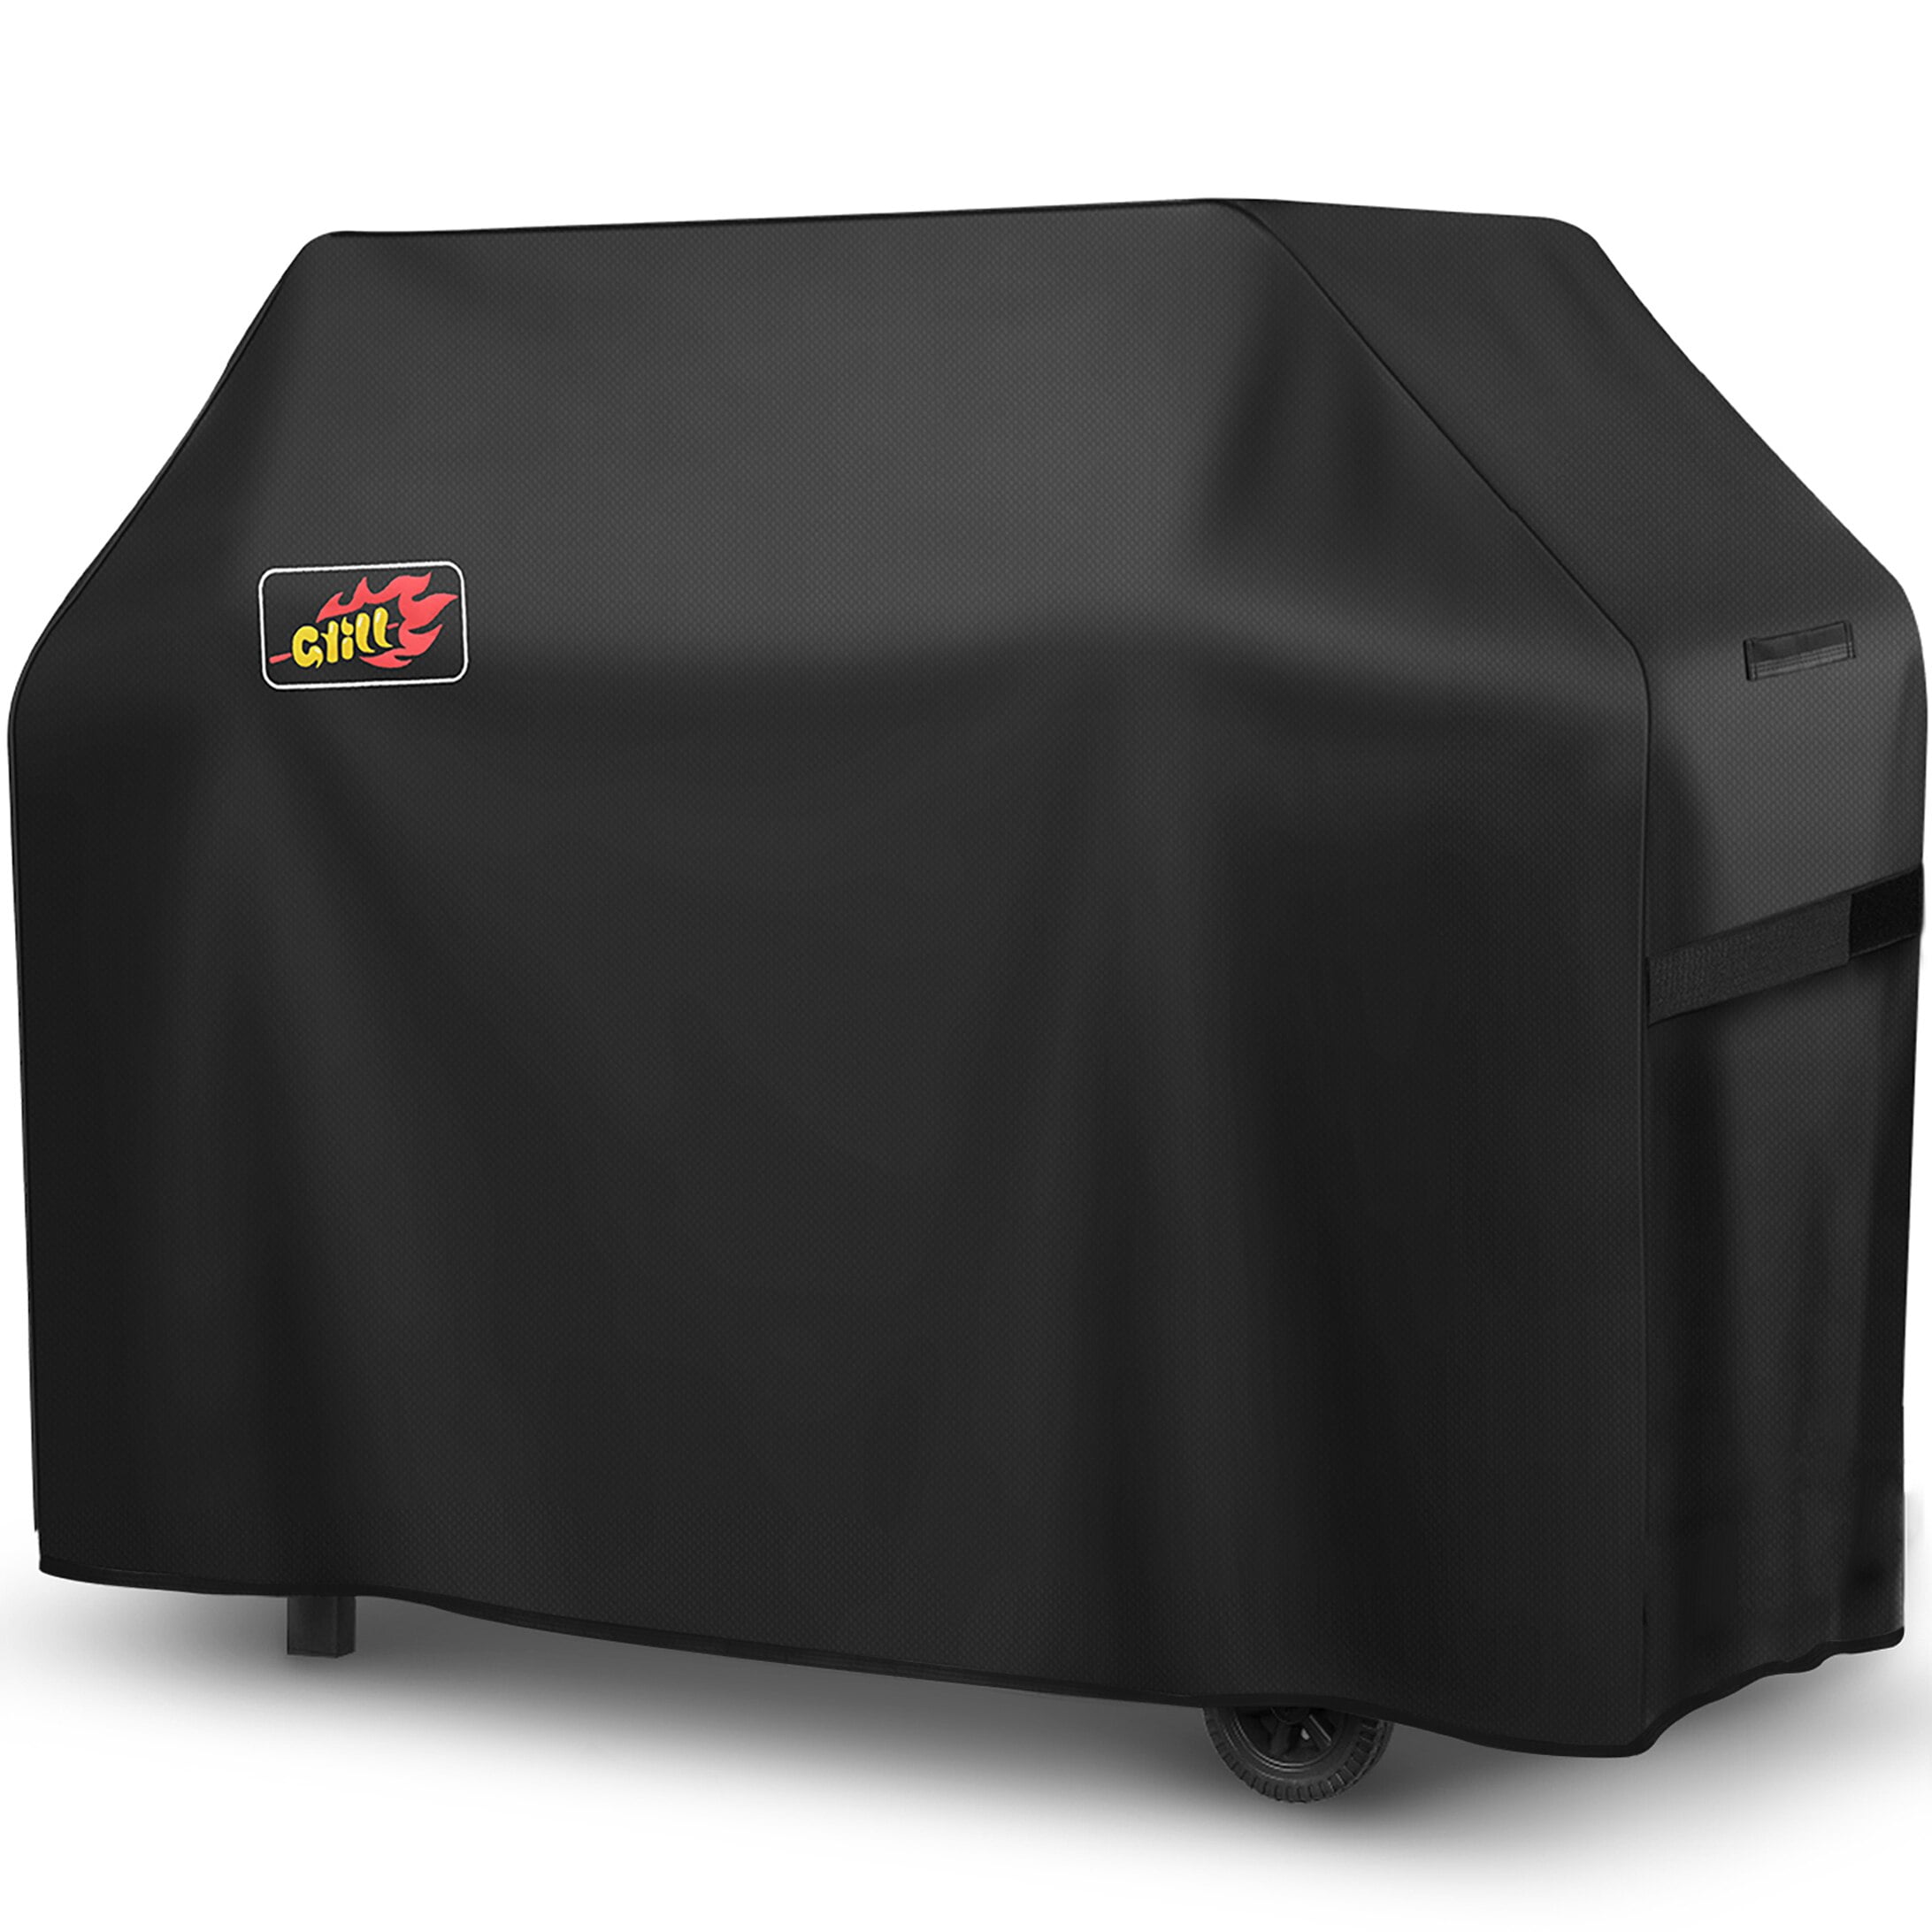 Details about   Pellet Grill Cover Smoker Heavy Duty Waterproof Patio Outdoor Barbecue BBQ 